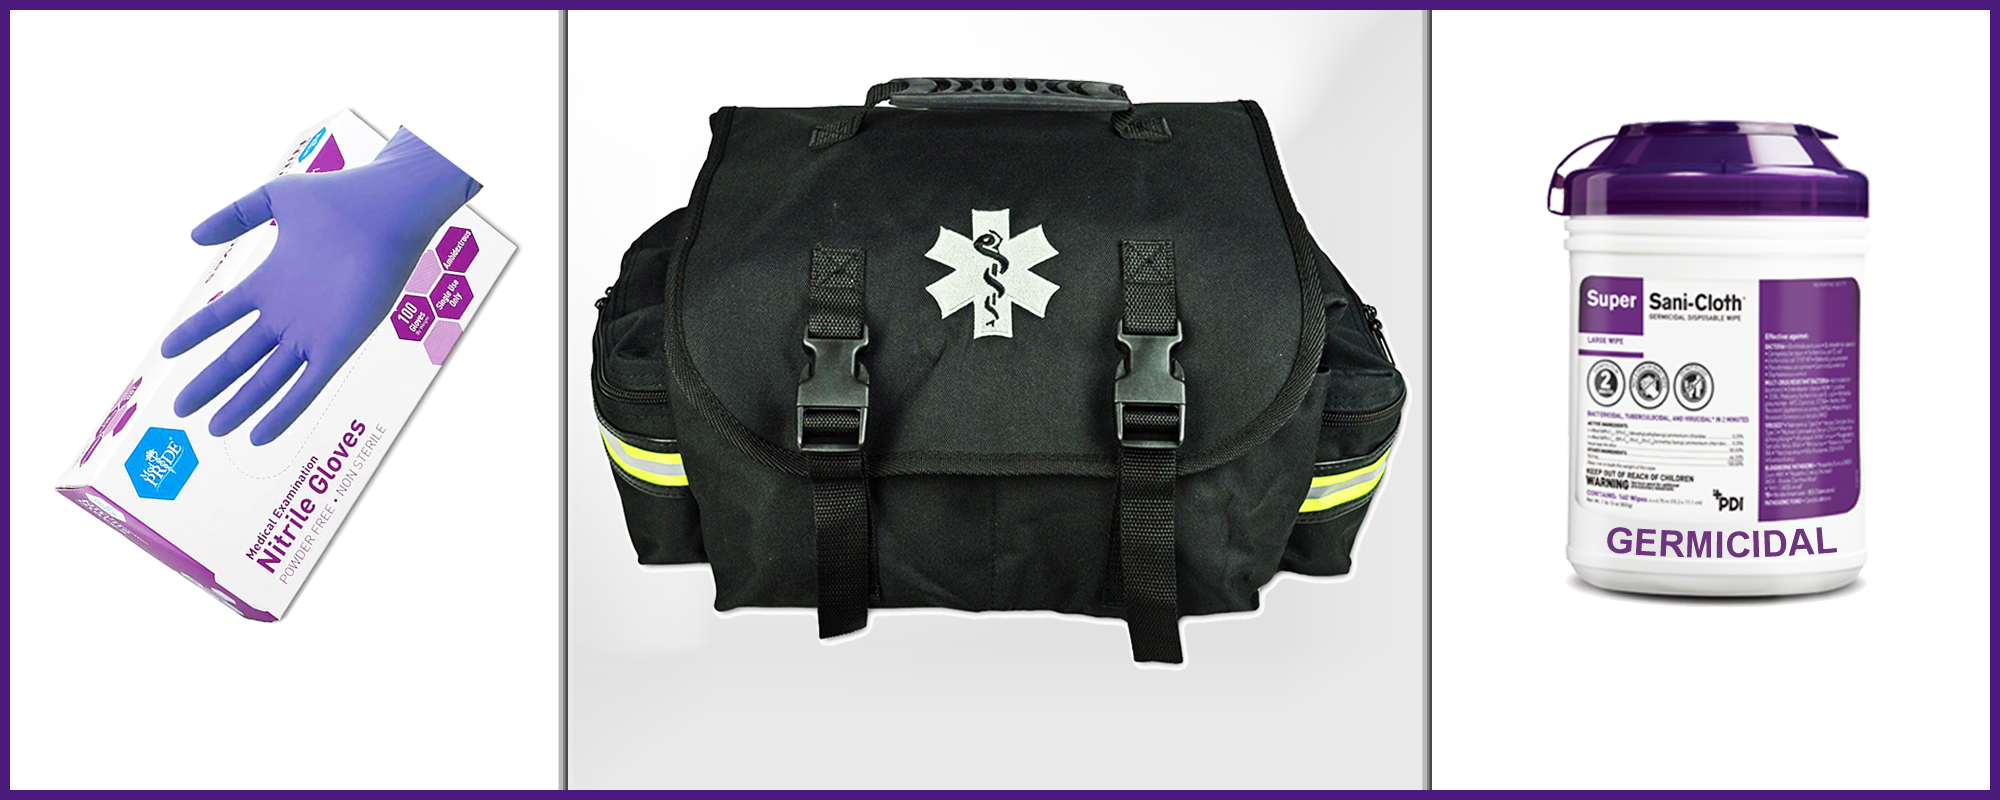 Williams Mobility keeps ample patient safety supplies on hand, including an EMT first responder kit.